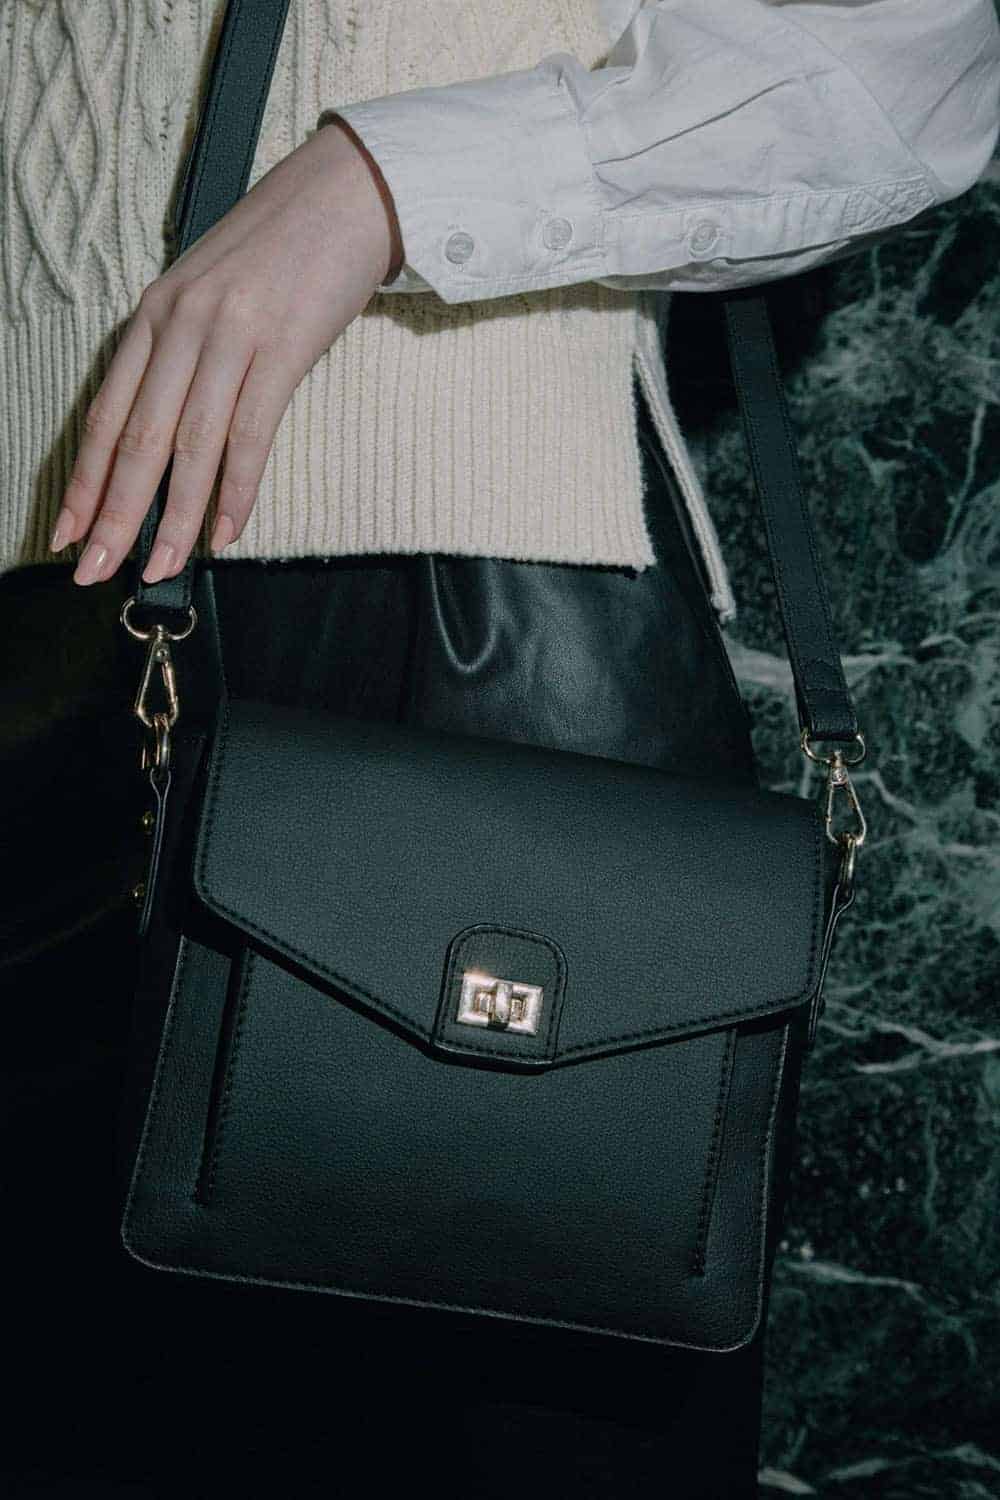 Person shown wearing black cactus leather crossbody bag